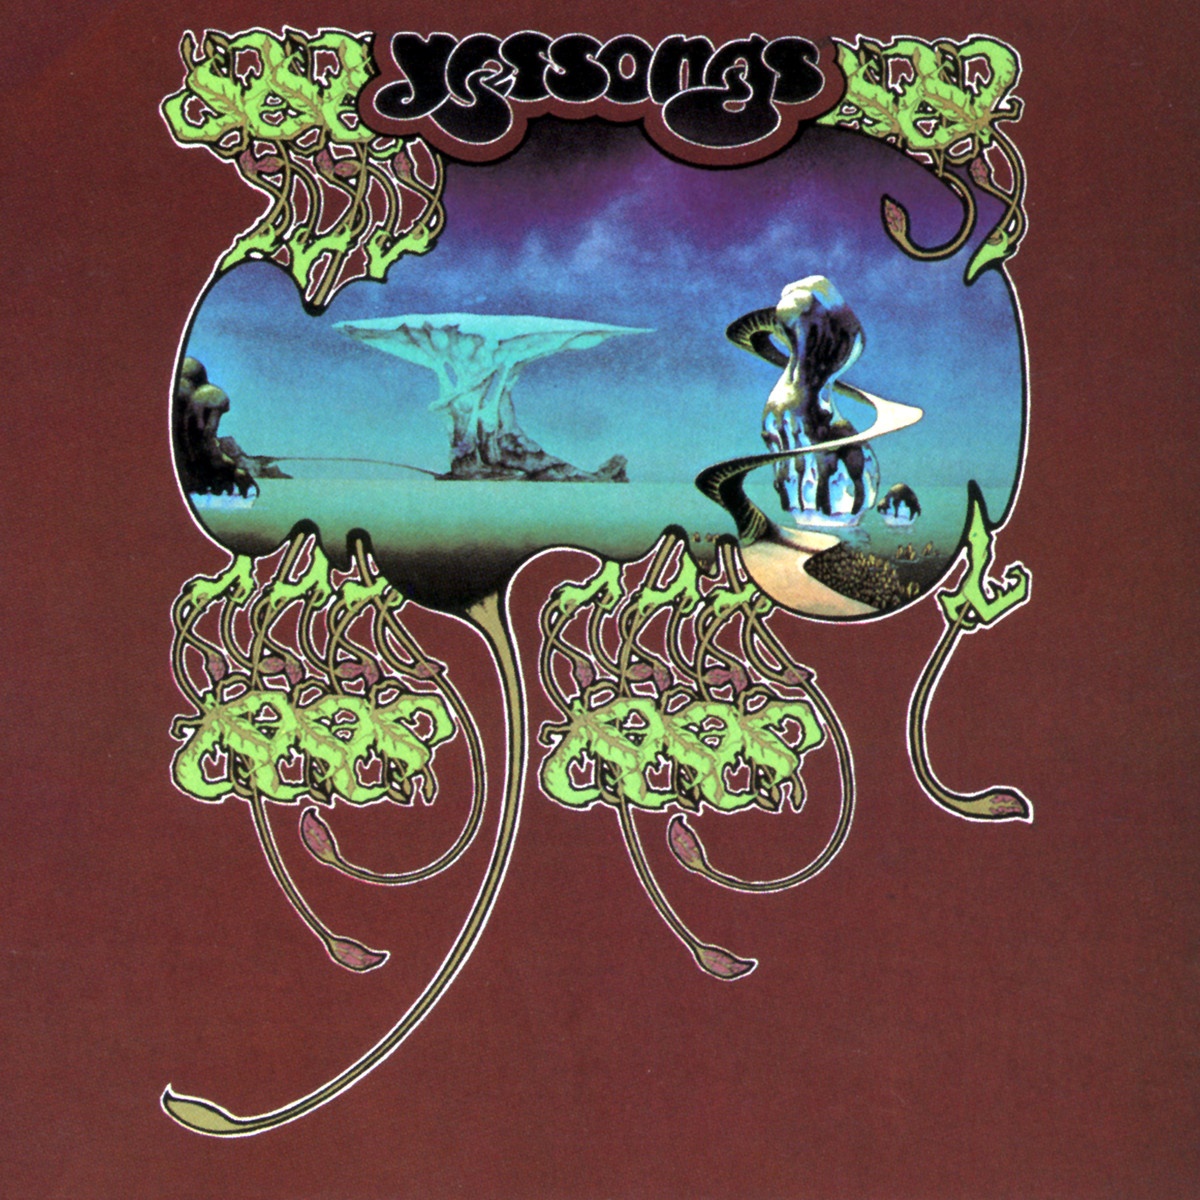 And You And I (A. Cord Of Life; B. Eclipse; C. The Preacher The Teacher; D. The Apocalypse) (Live LP from Yessongs)